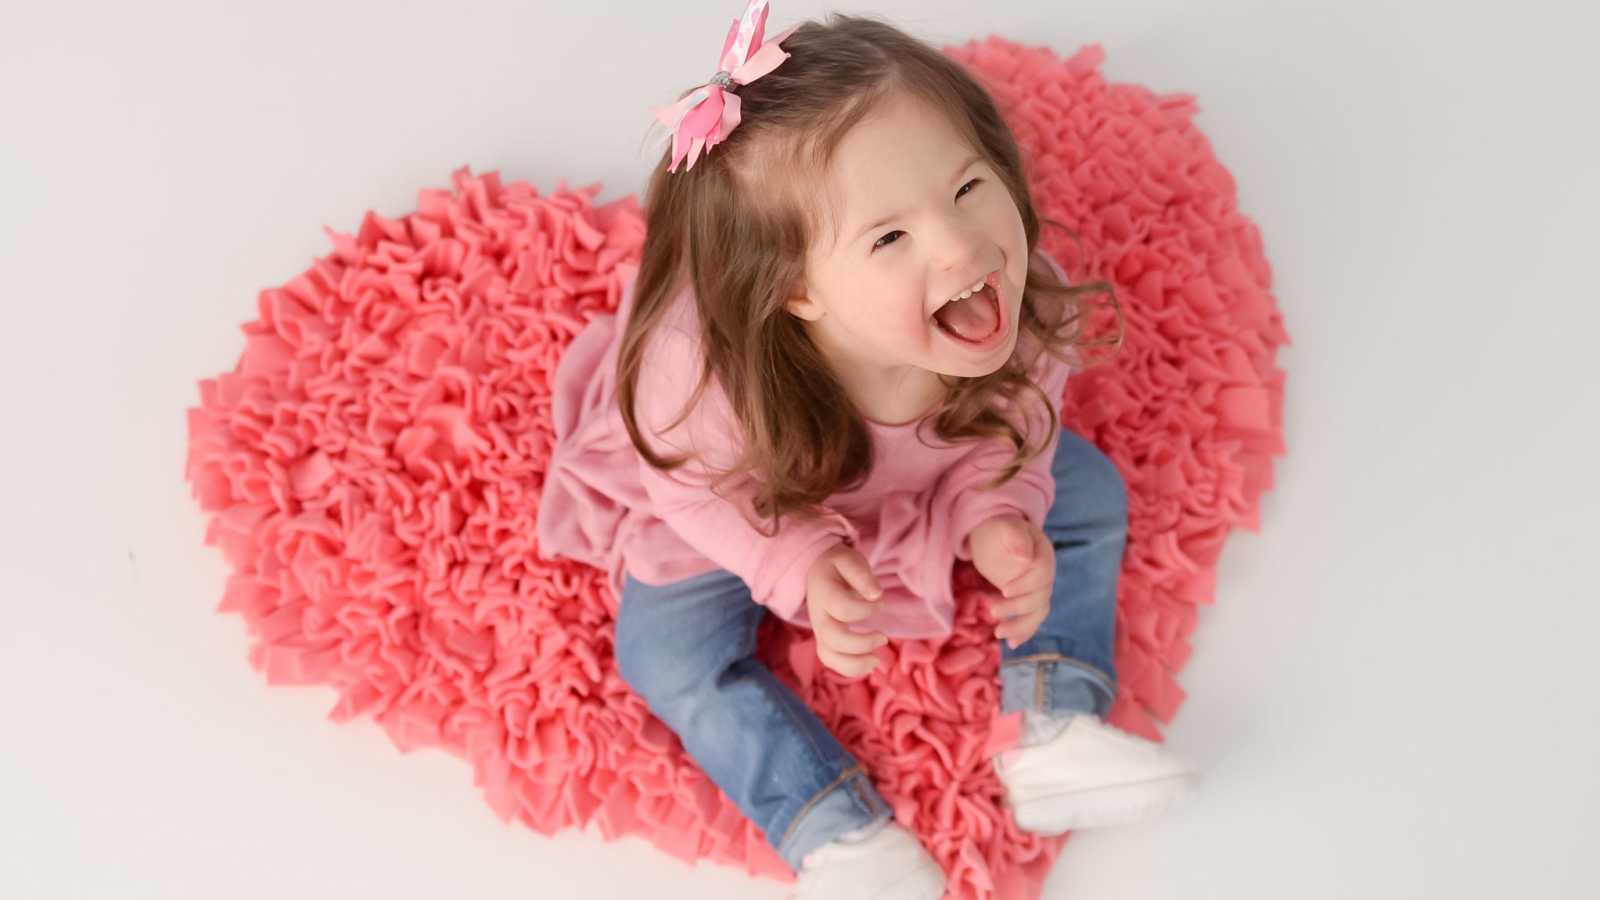 Little girl with down syndrome sits on heart shaped rug as she looks up smiling